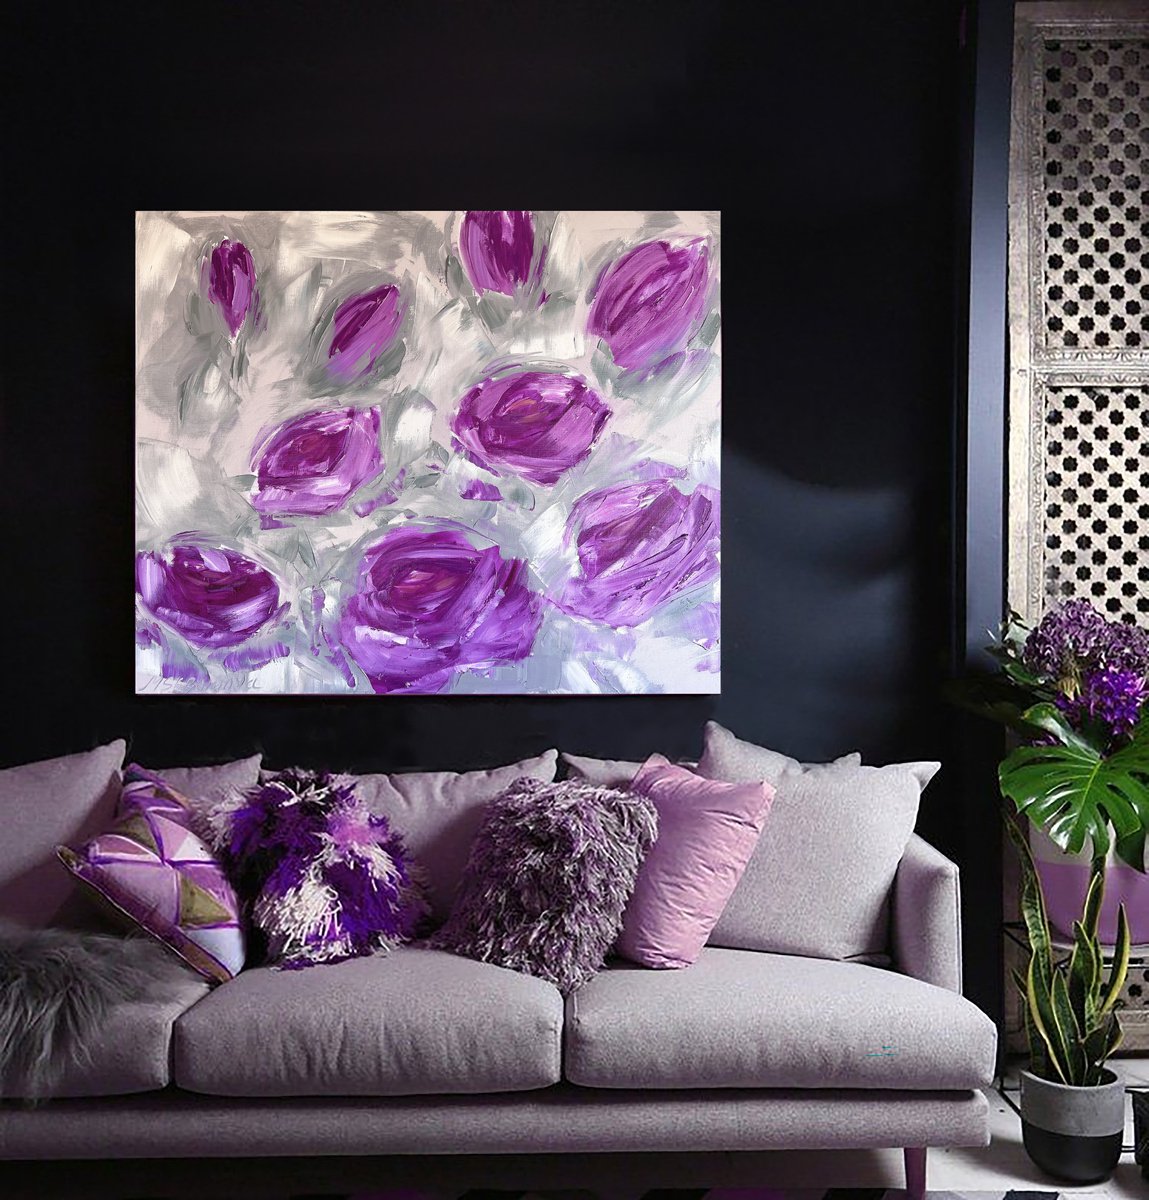 Violet mix - large roses, rough, abstract flowers KhL. by Marina Skromova